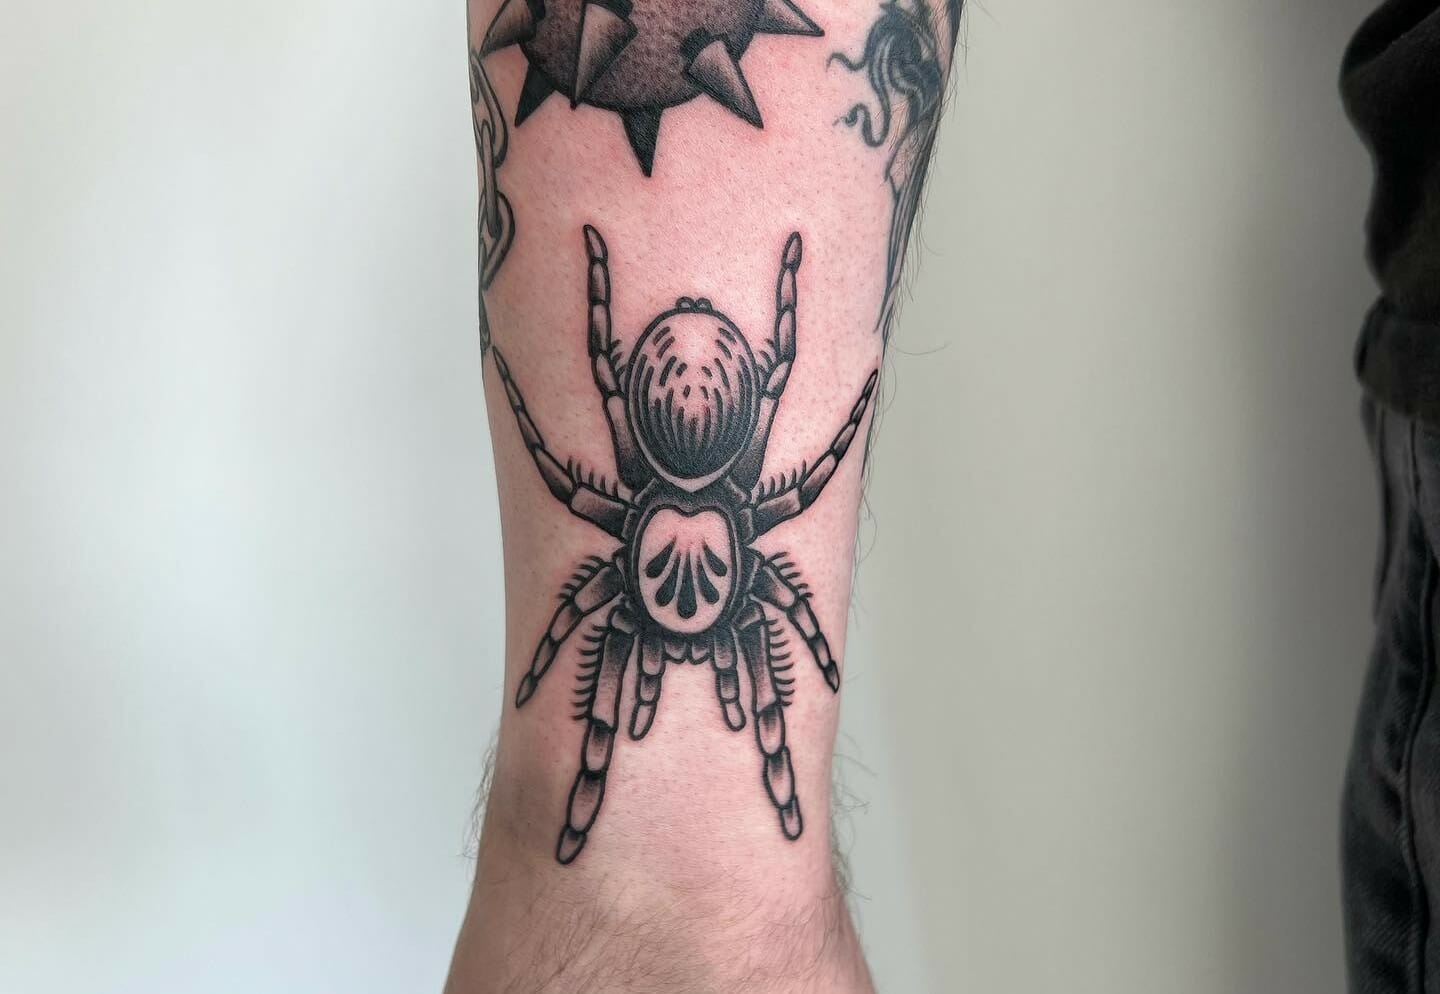 Spider and web tattoo sleeve - wide 5